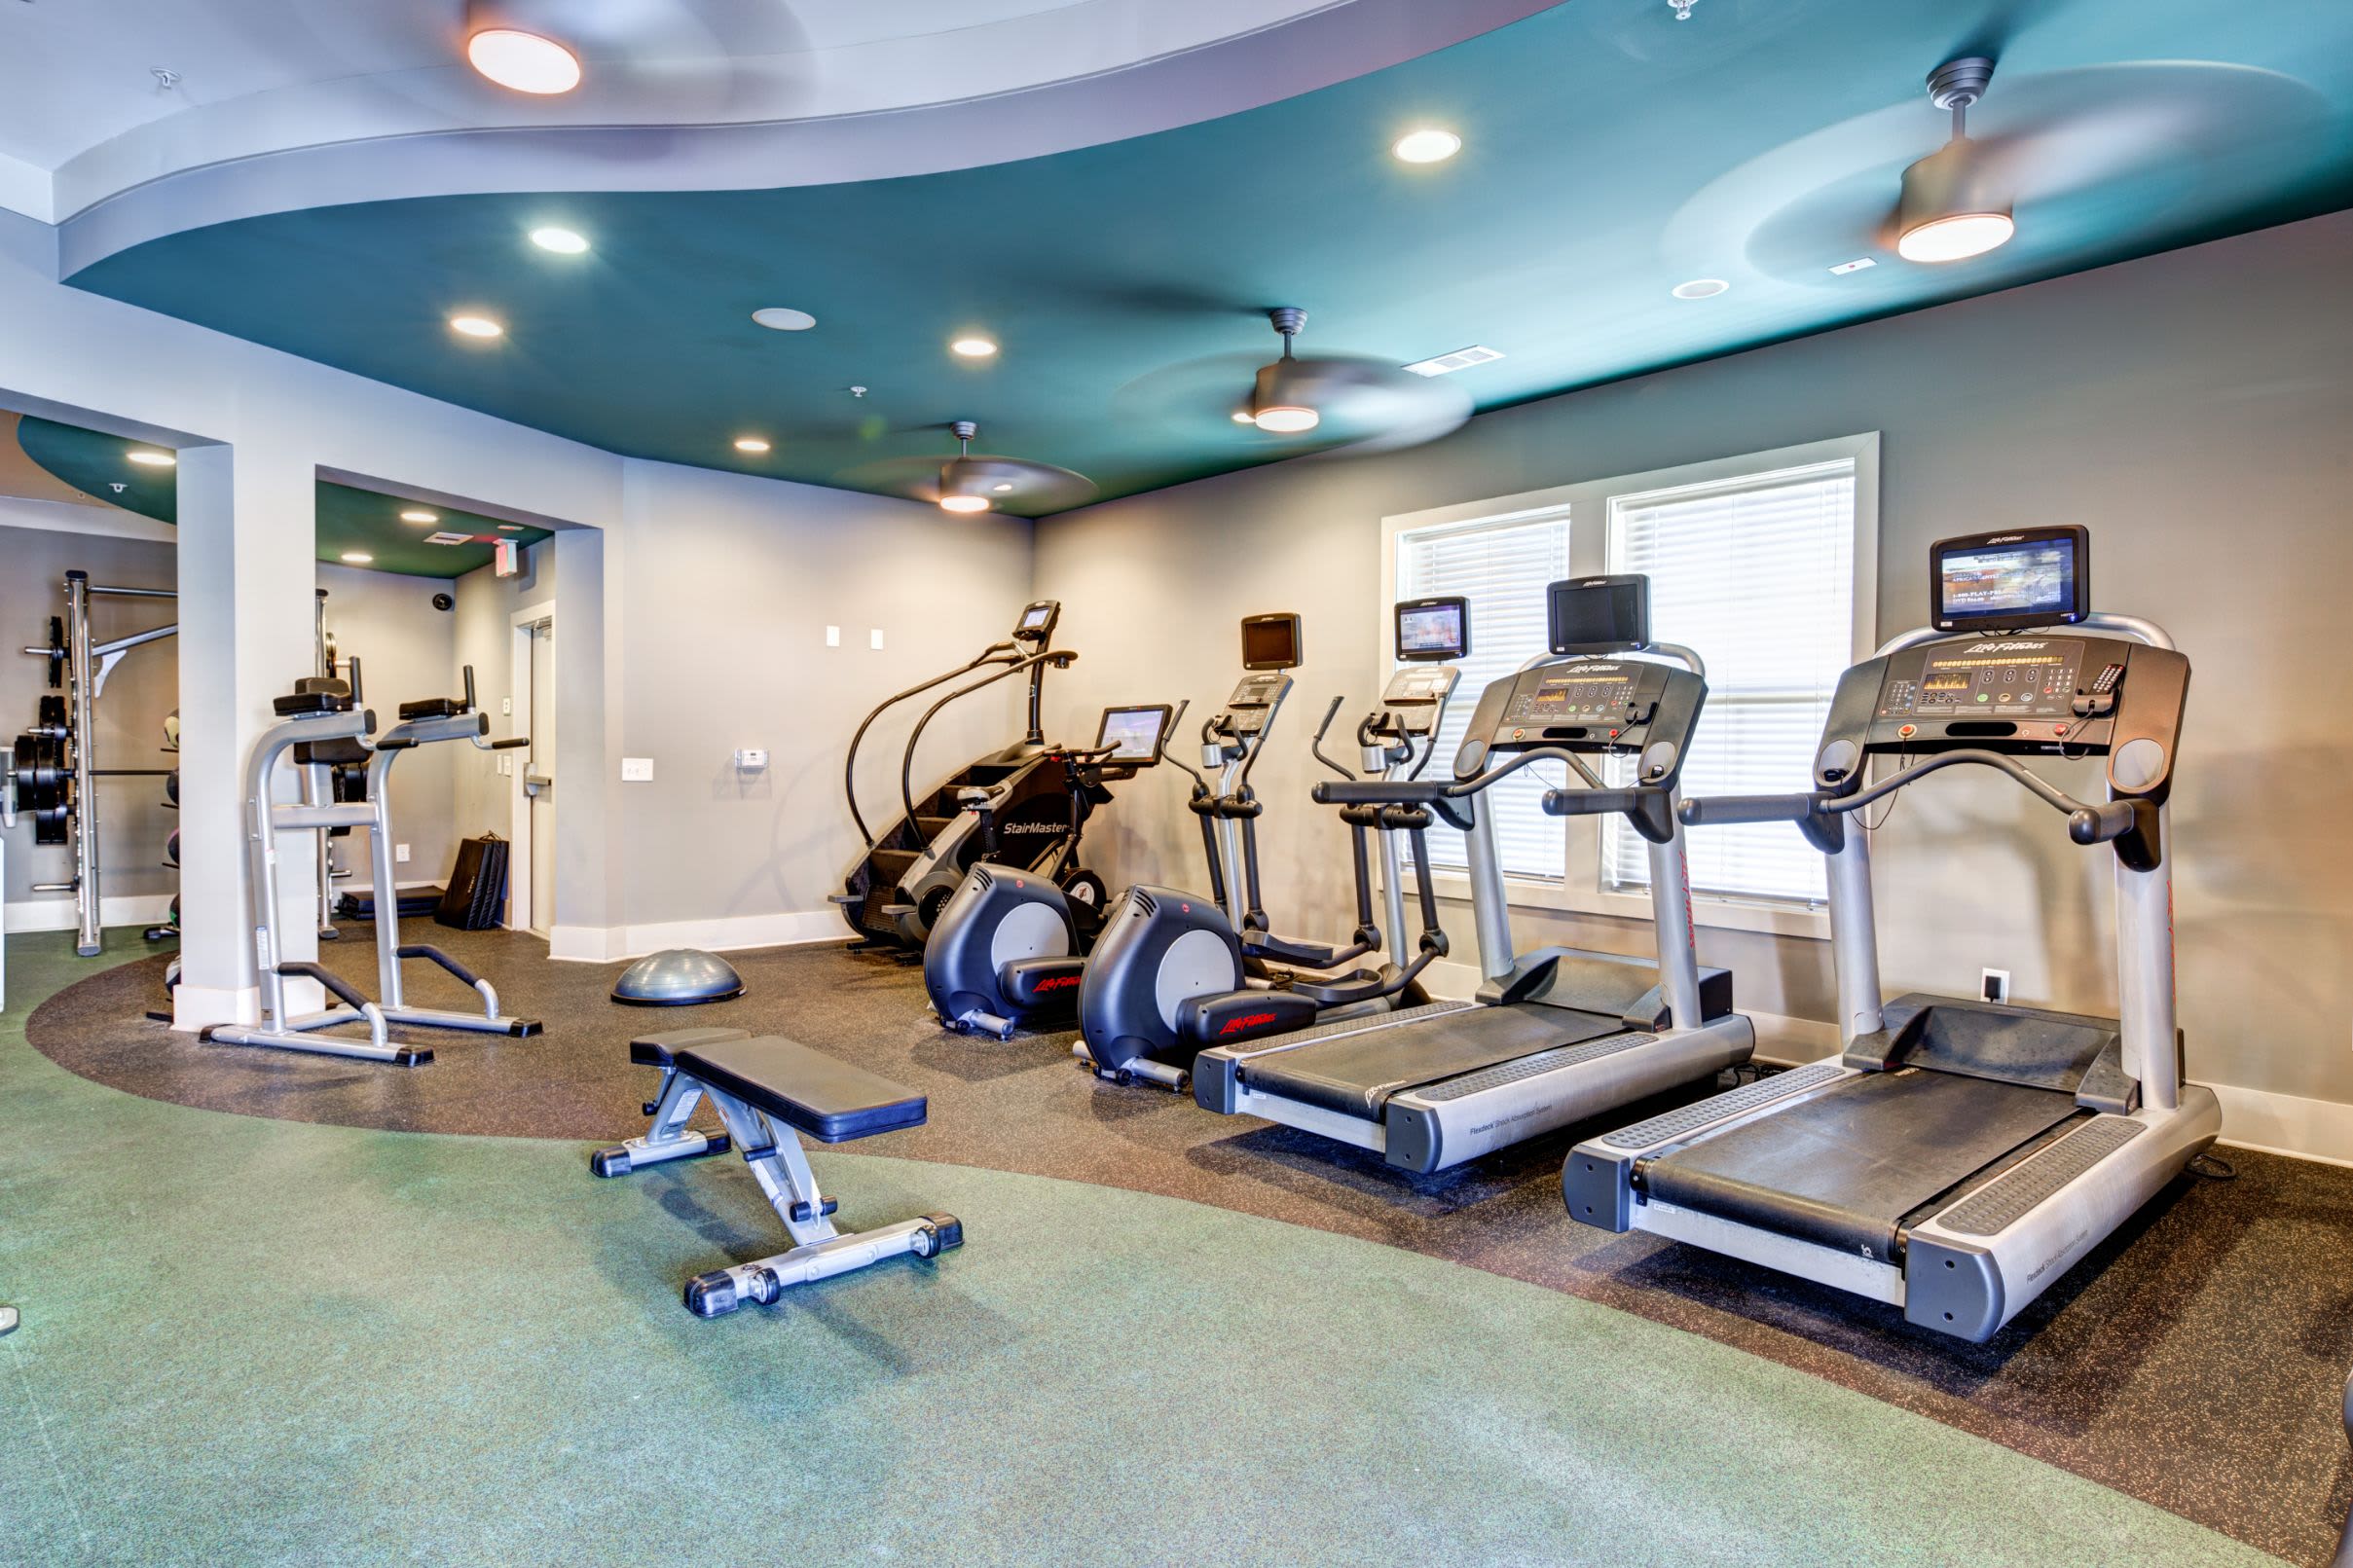 Fitness center with cardio equipment and weights at Marquis at Morrison Plantation in Mooresville, North Carolina